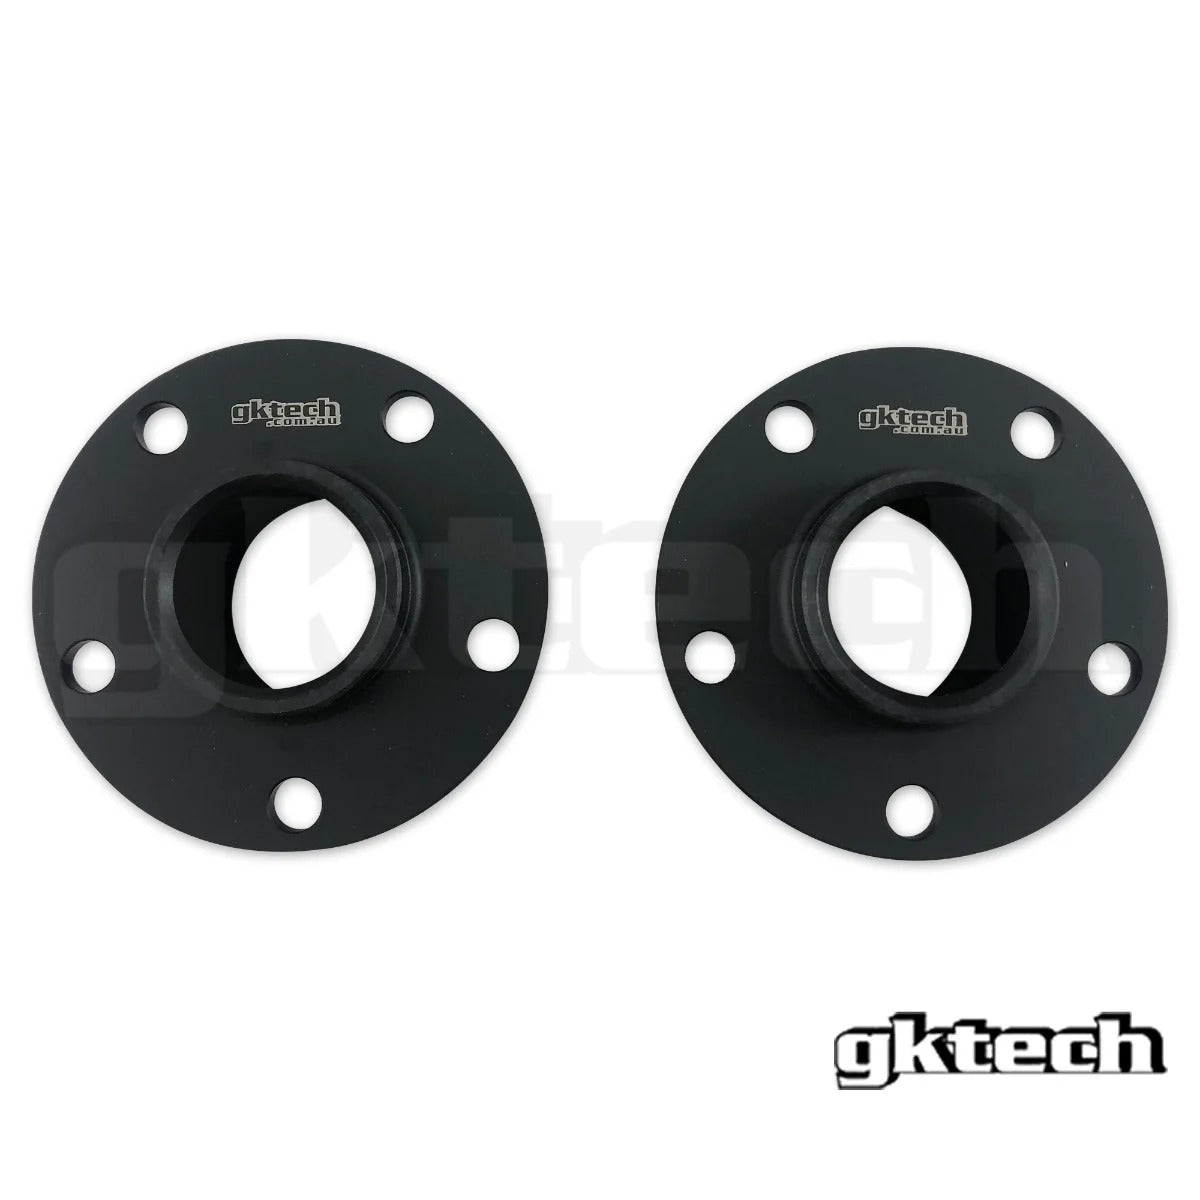 S13 Silvia/180sx 4 to 5 stud front conversion hubs (PAIR)